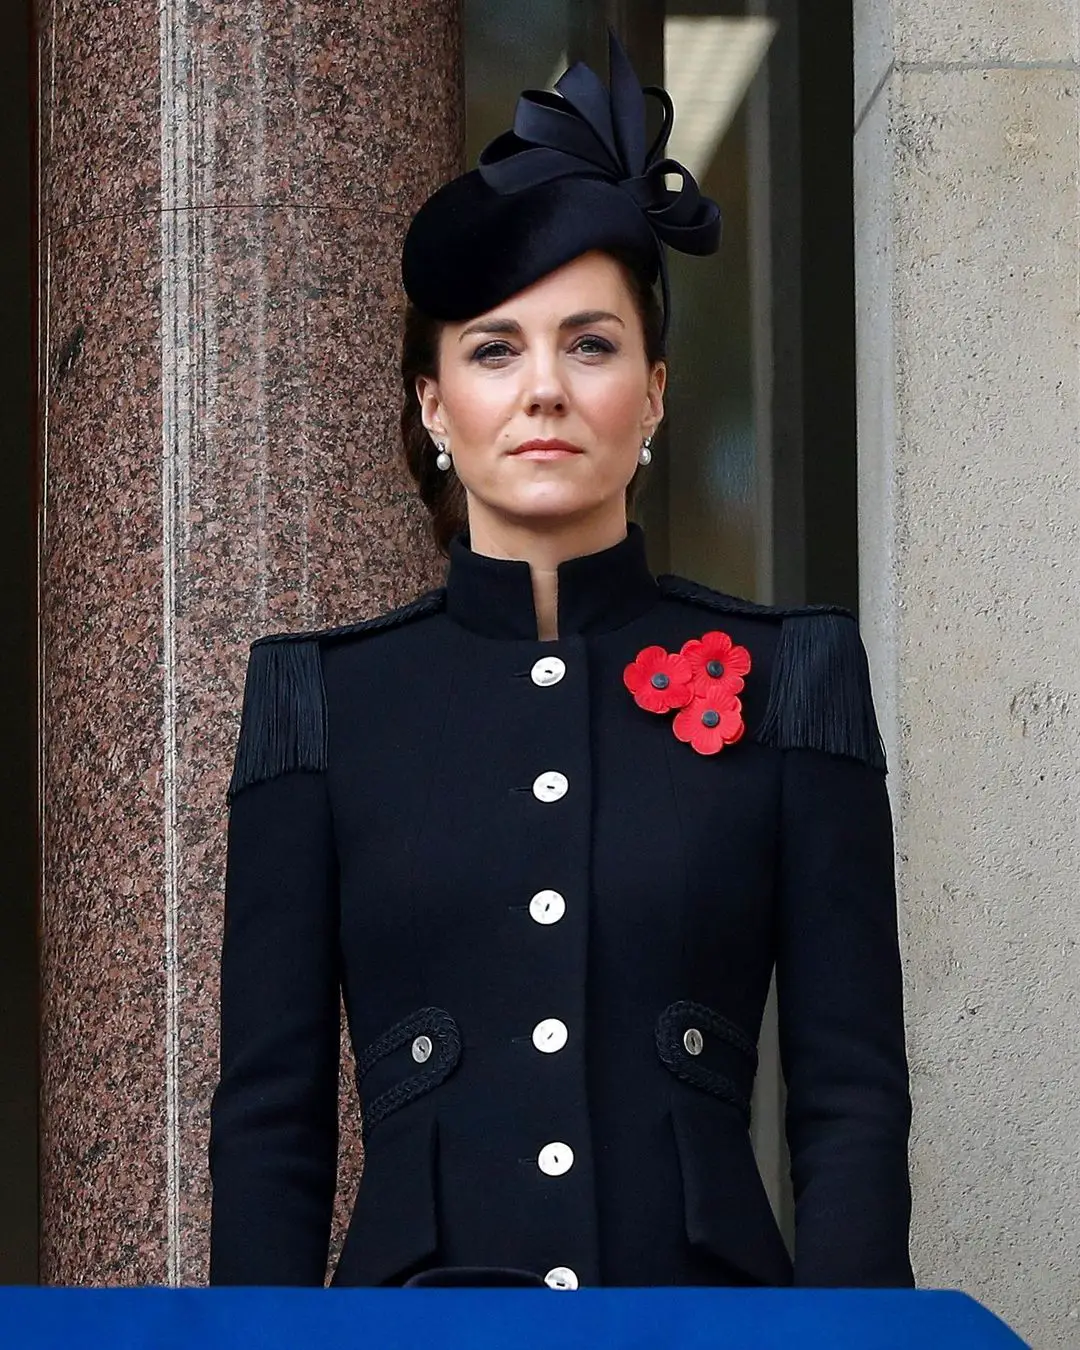 The Duchess of Cambridge attended Annual Remembrance Day Service in 2020